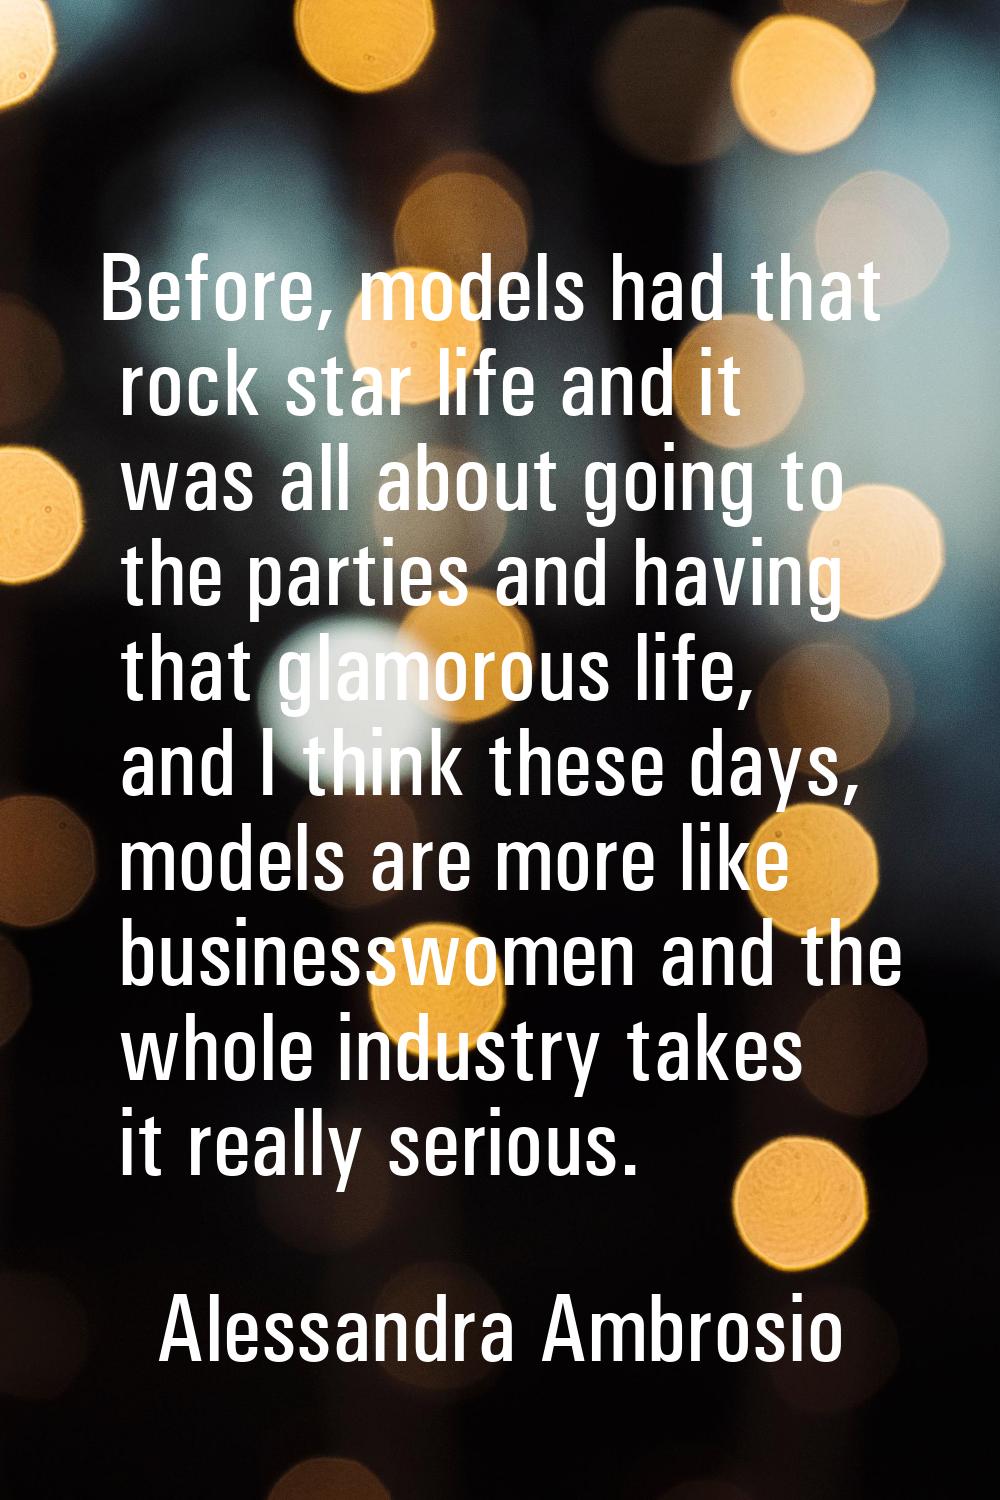 Before, models had that rock star life and it was all about going to the parties and having that gl